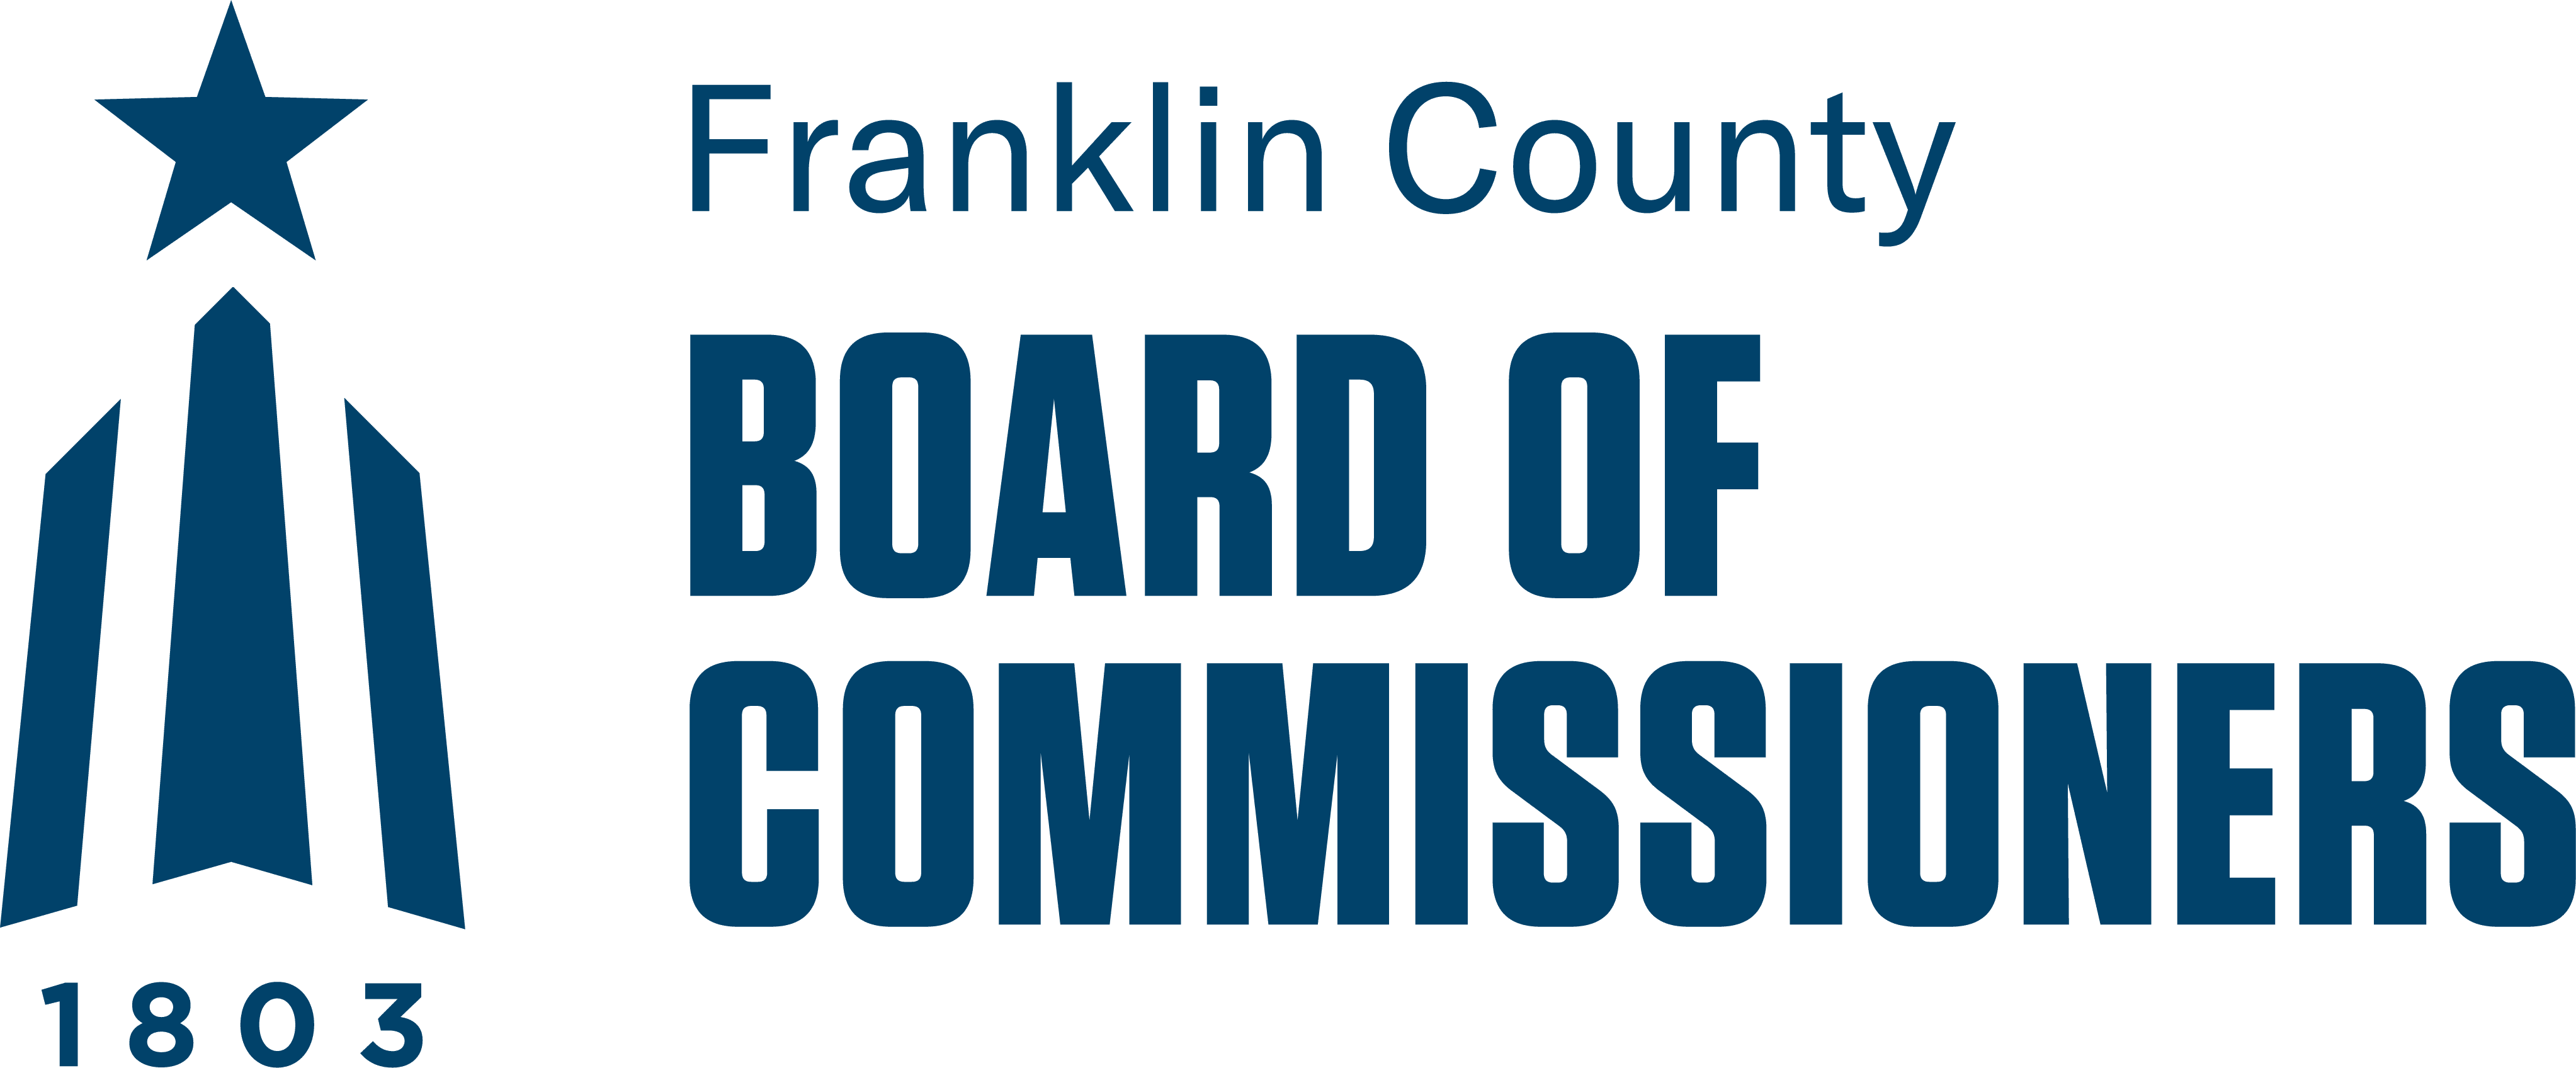 Franklin County Board of Comissioners logo